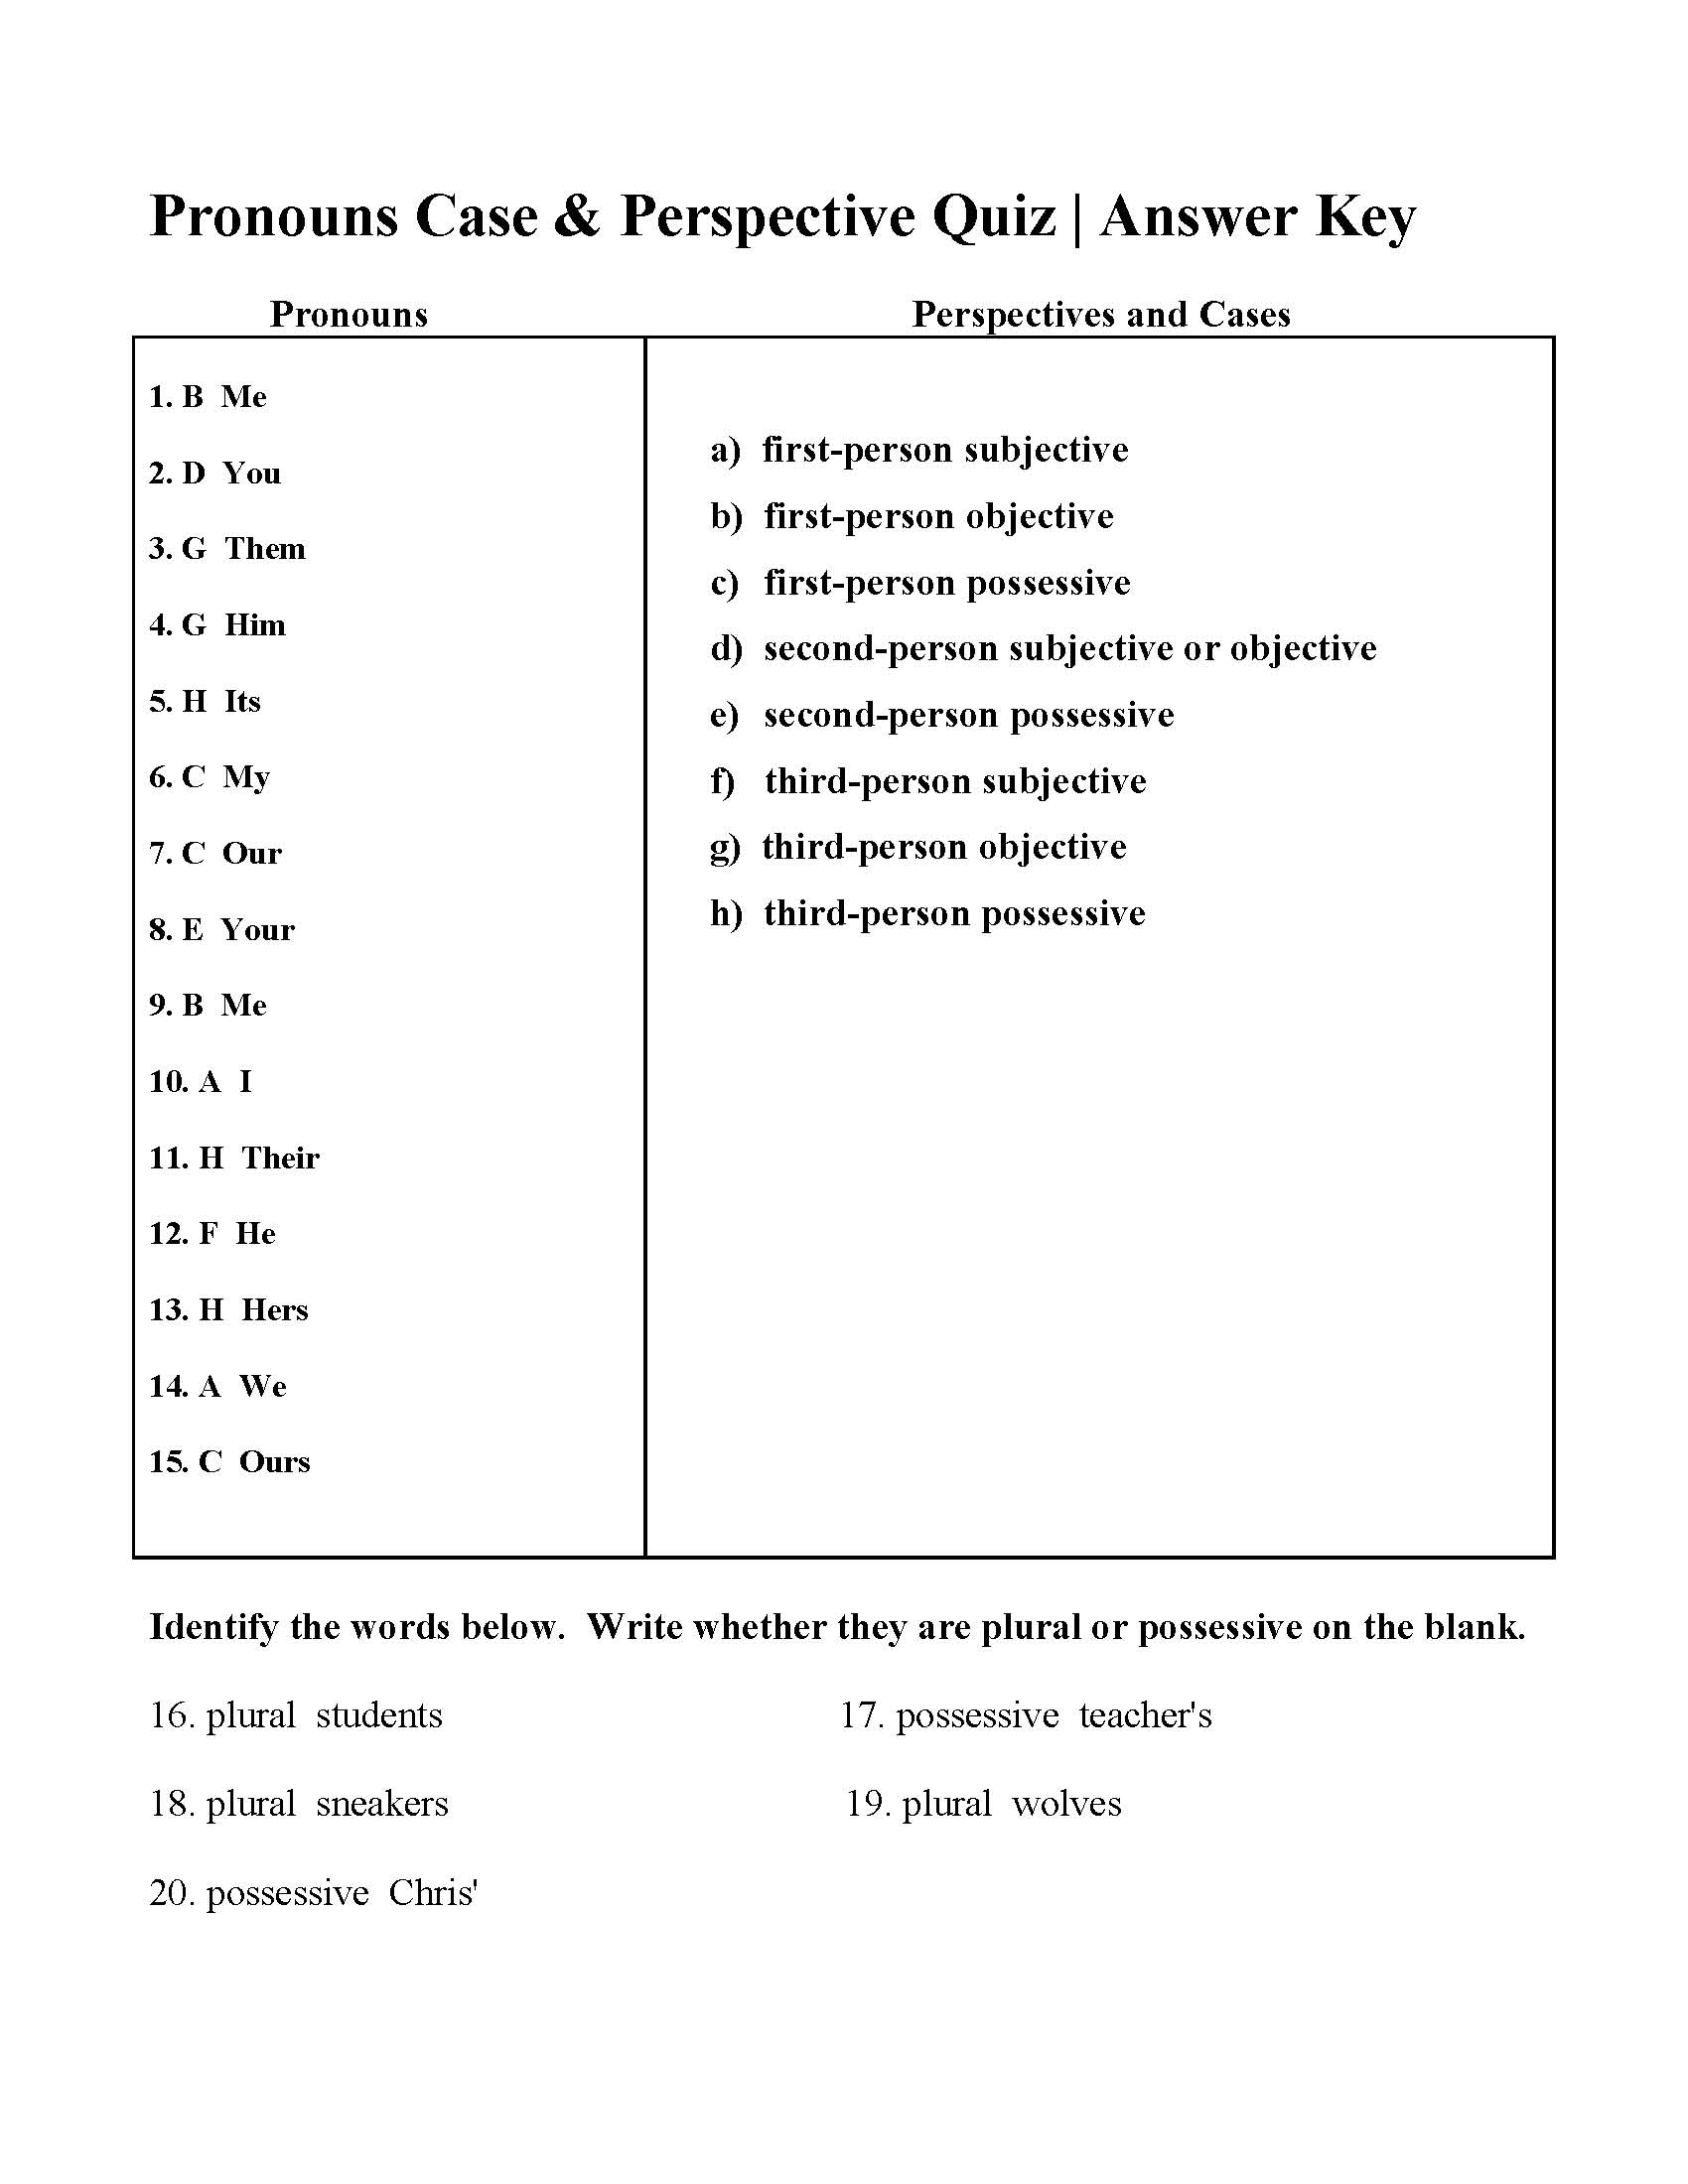 This is the answer key for the Pronoun Case and Perspective Quiz.